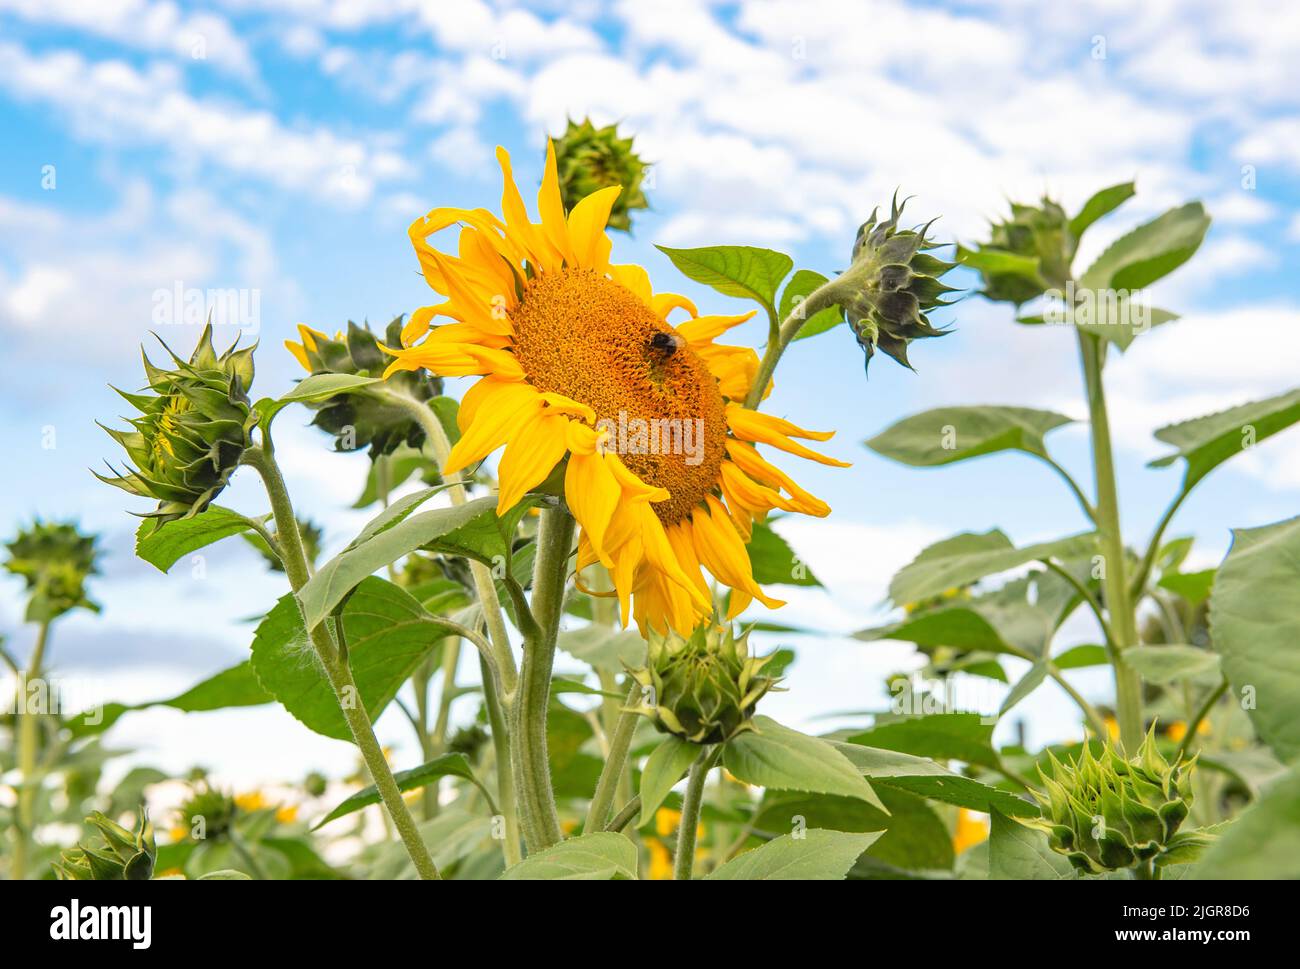 Sunflowers over blue sky. Summer nature background Stock Photo